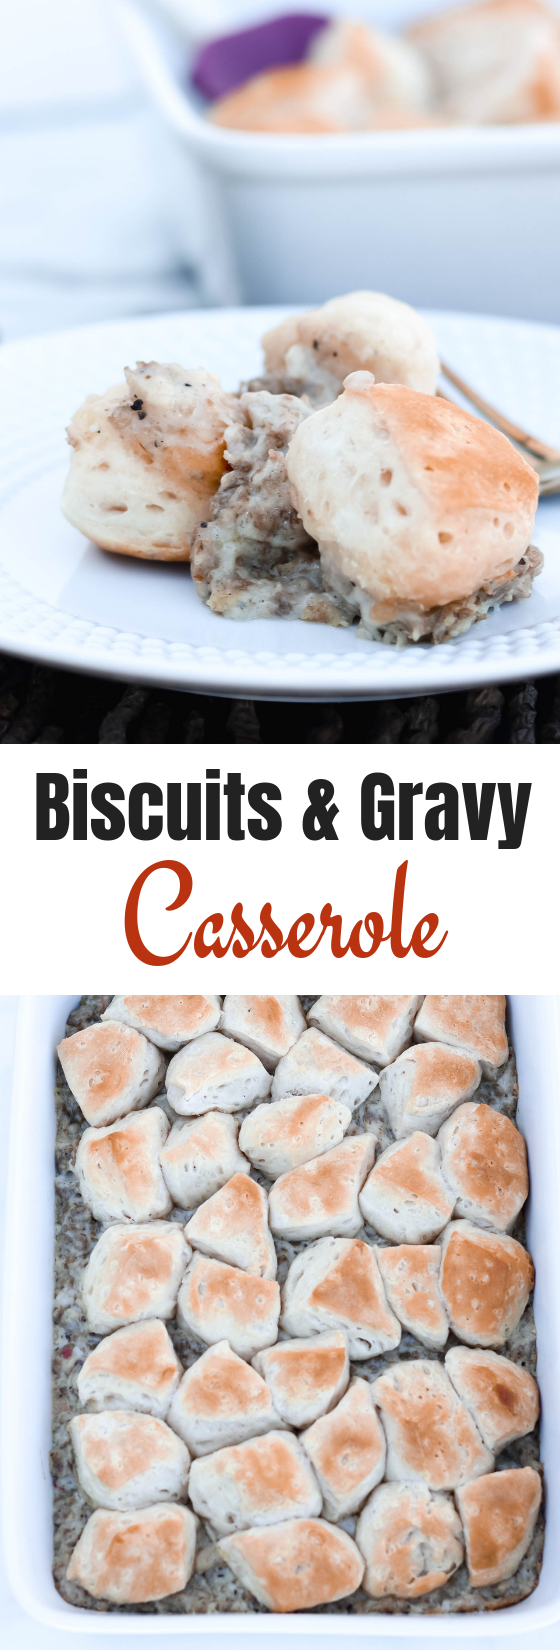 This Biscuits and Gravy Casserole